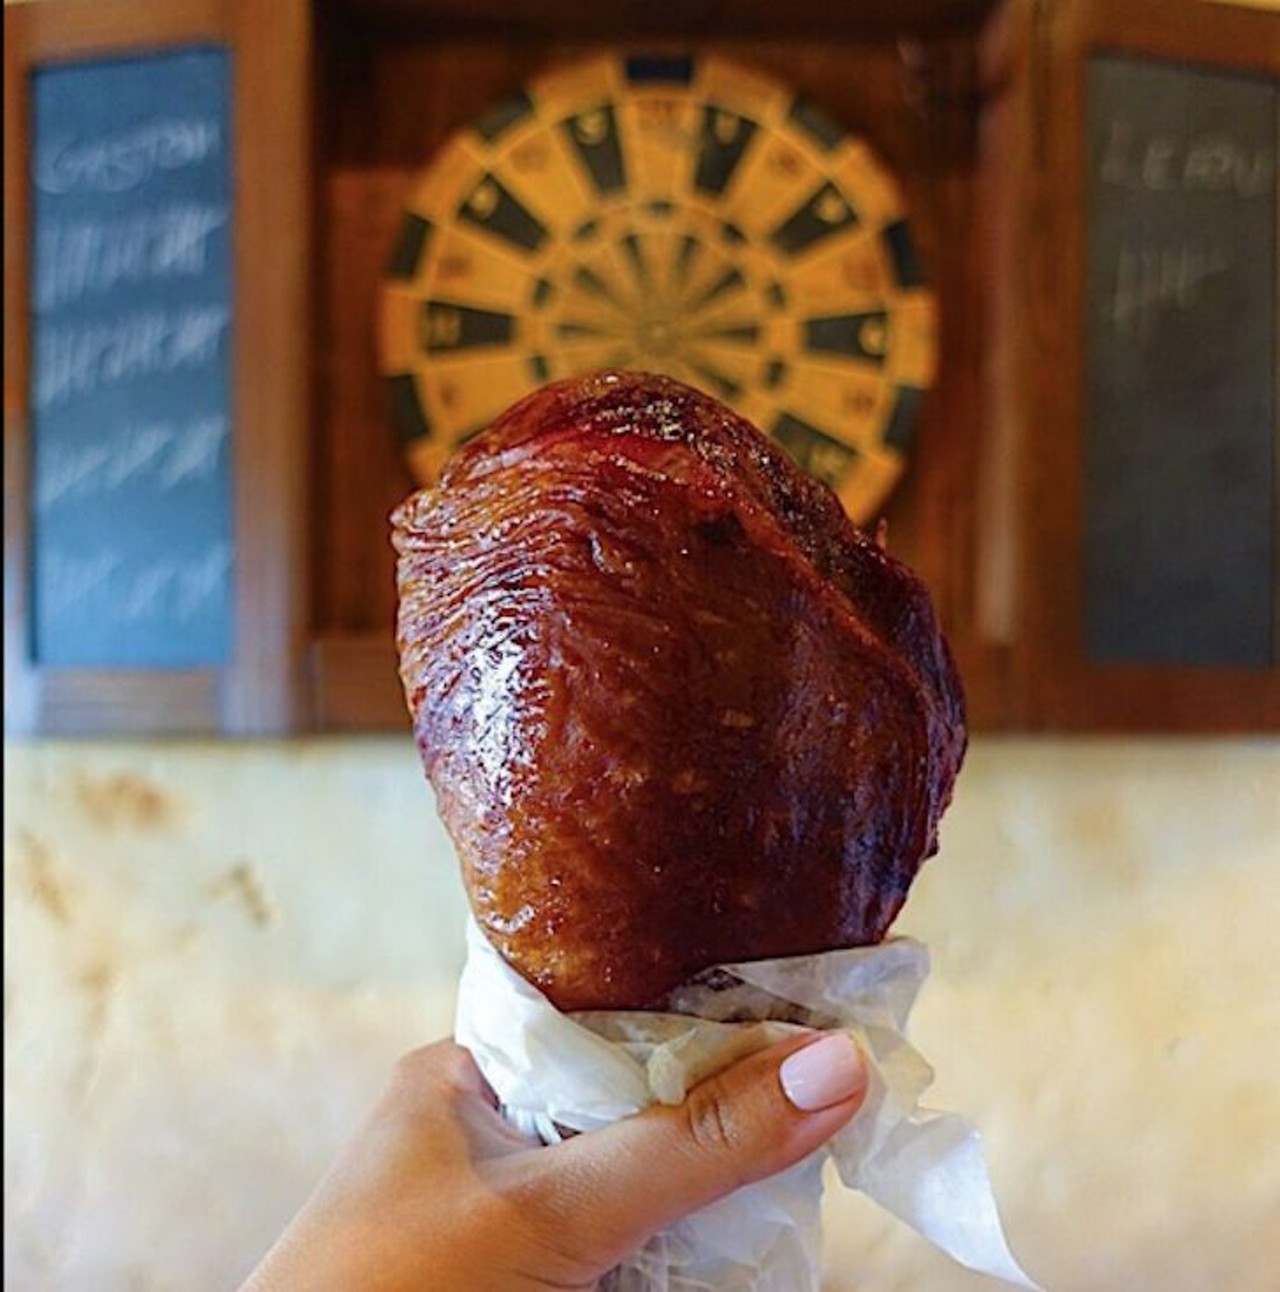 Walt Disney World: Turkey leg  
Multiple locations
A trip to the happiest place on Earth wouldn&#146;t be complete without gnawing on a giant turkey leg. These monsters can be found in Magic Kingdom, Epcot and Animal Kingdom.
Photo via Yelp/Alexandra T.